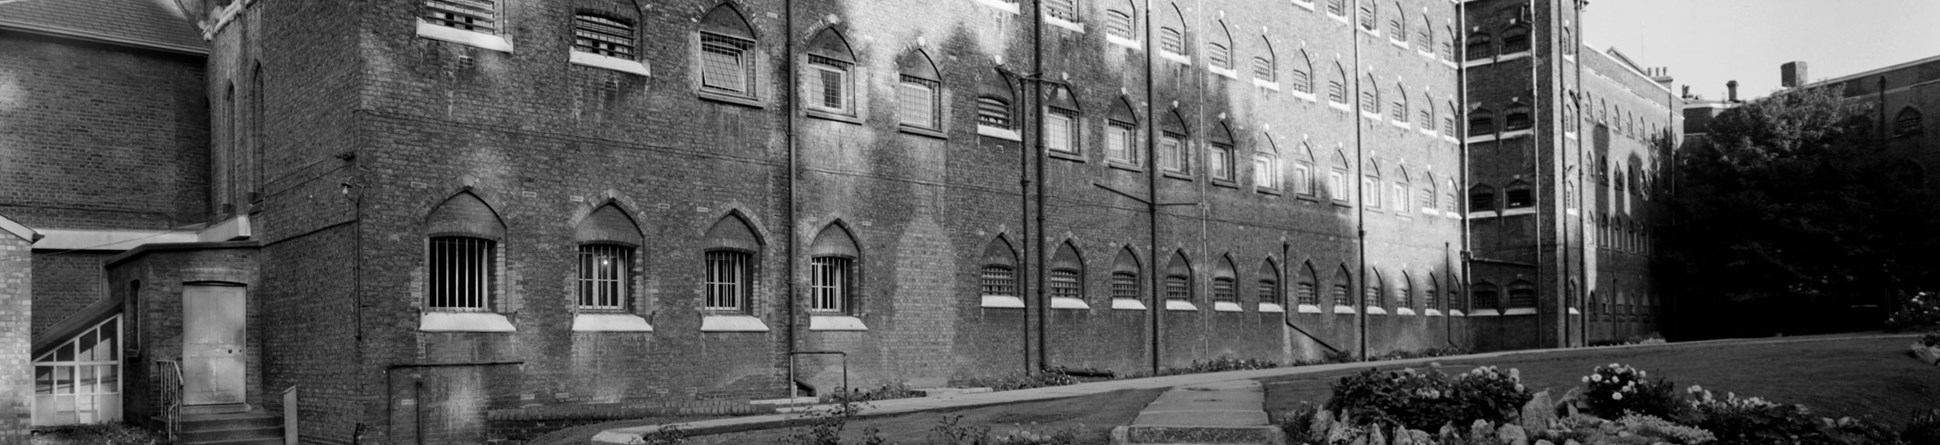 Black and white photo of 'C' wing of Holloway Prison from the north.